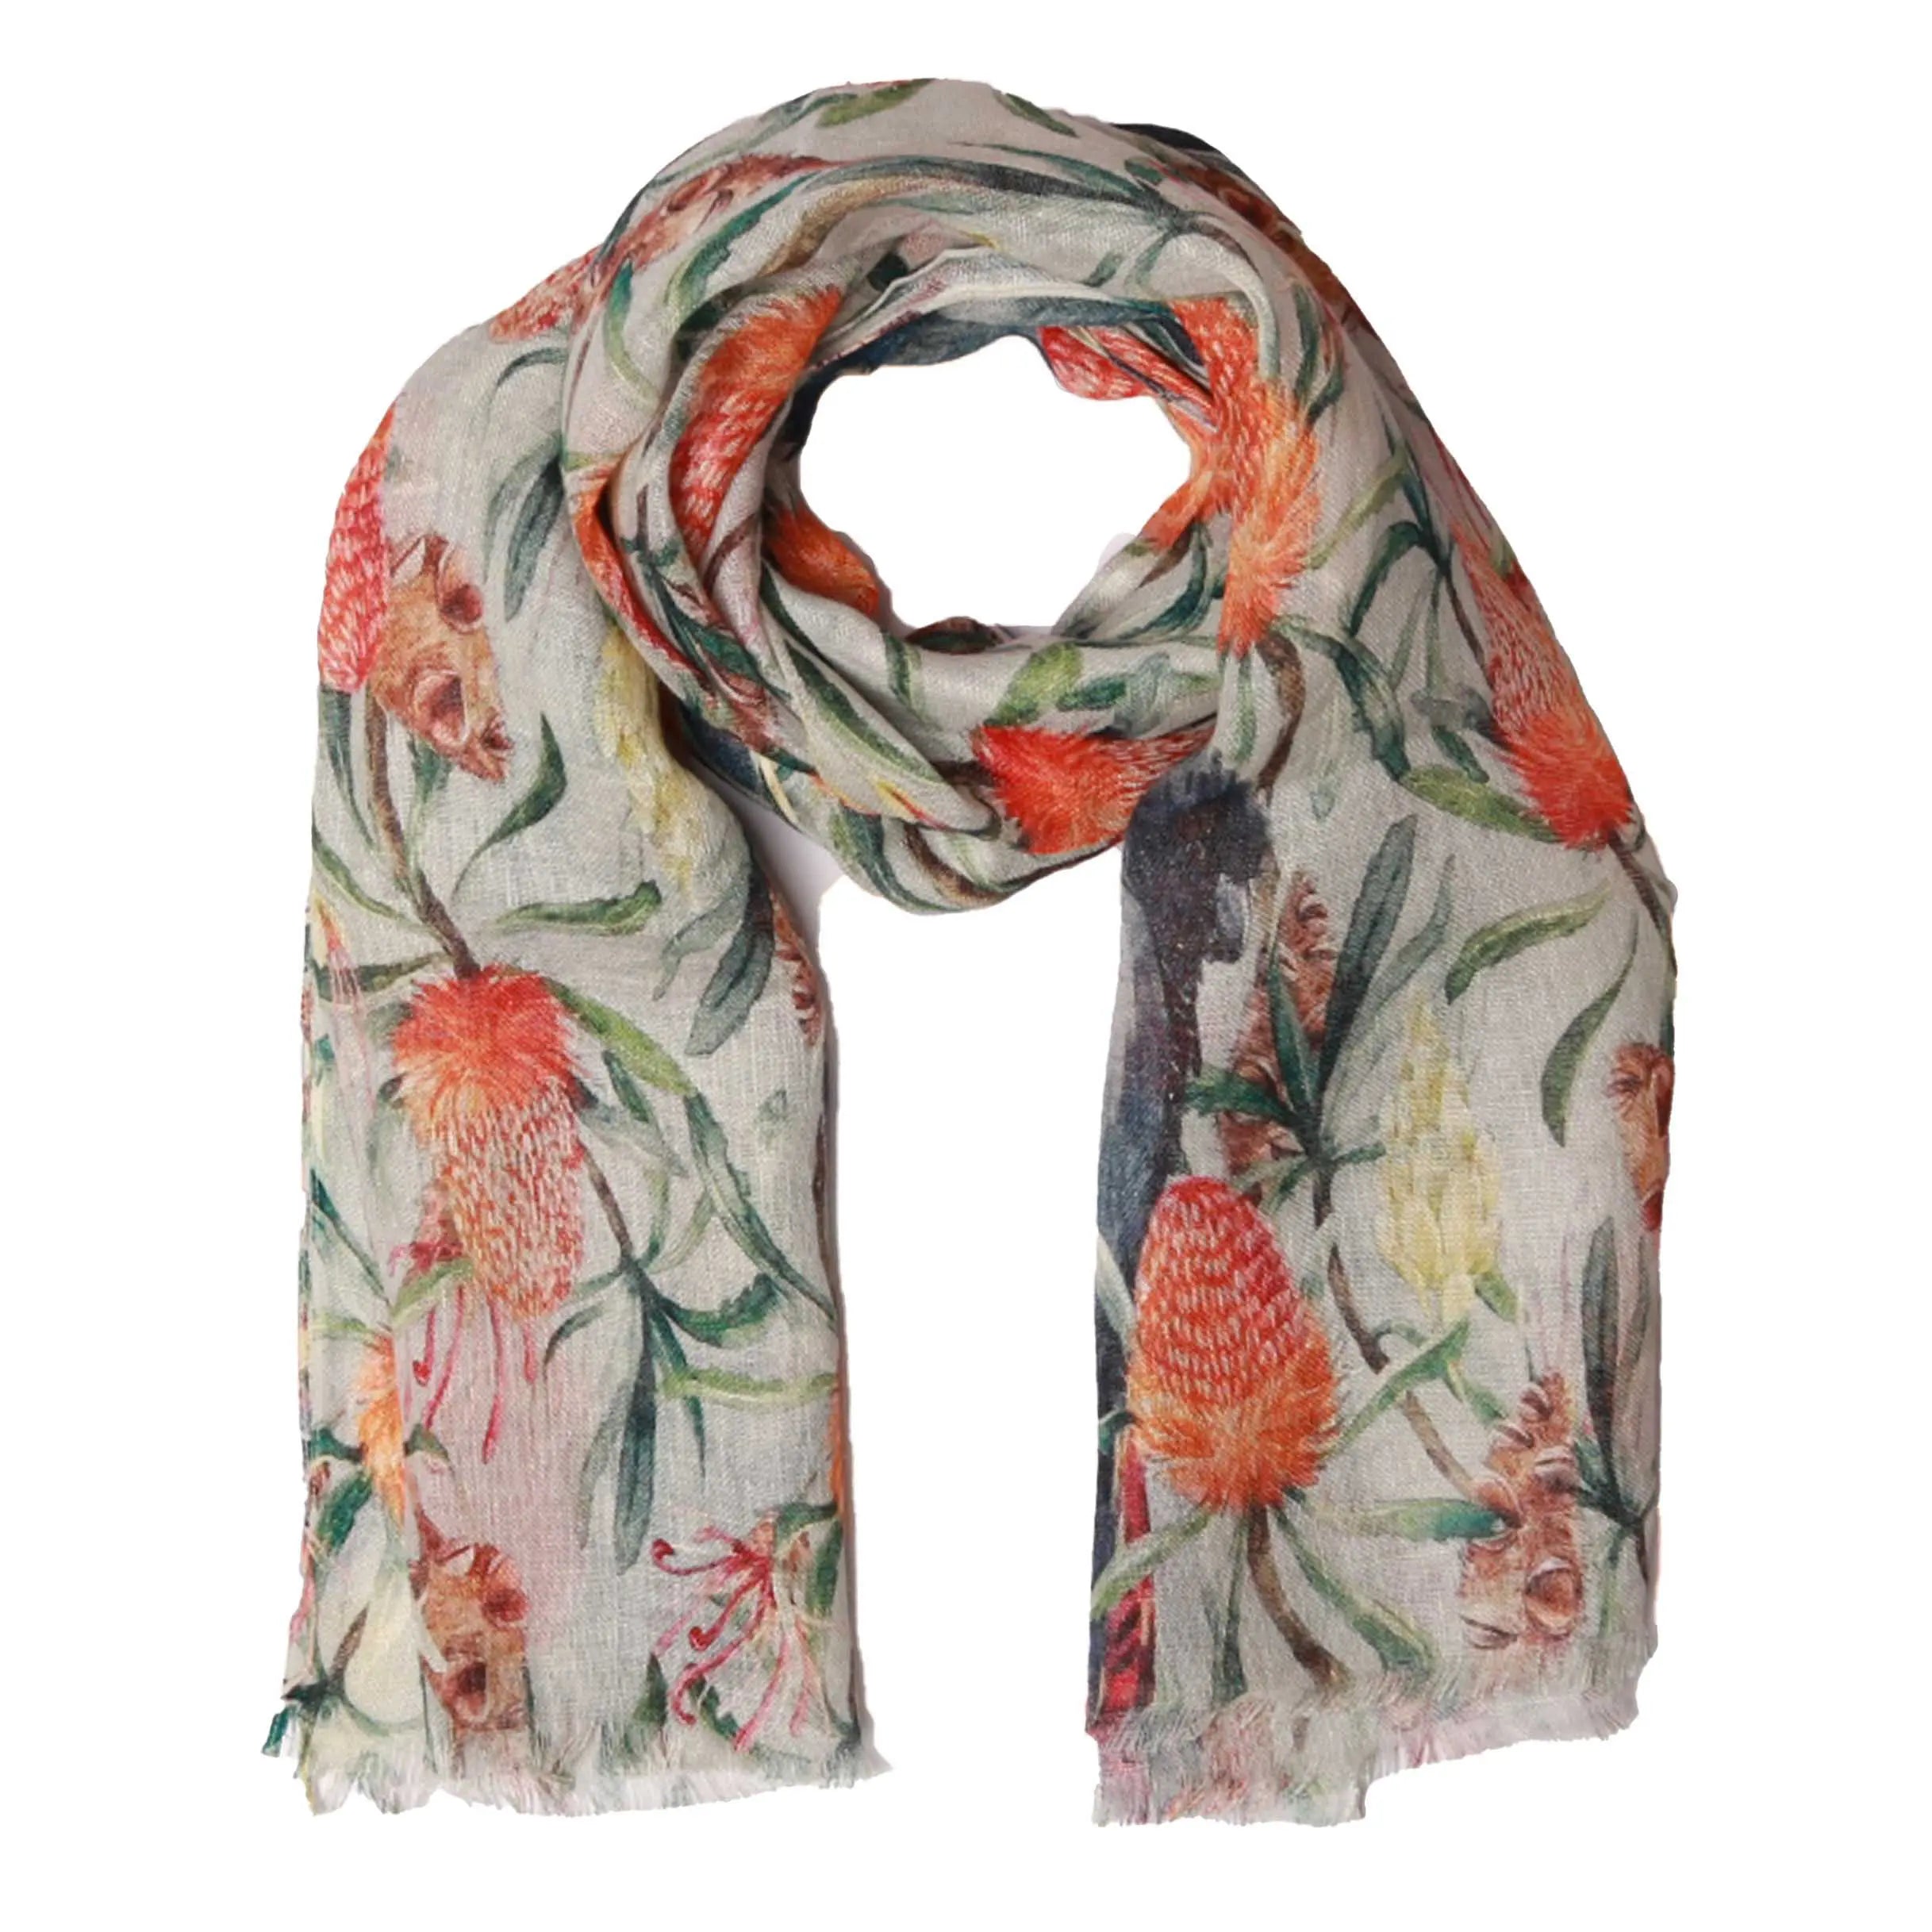 Transform your look with our floral scarves! Embrace sophistication and charm with every drape. Shop now!